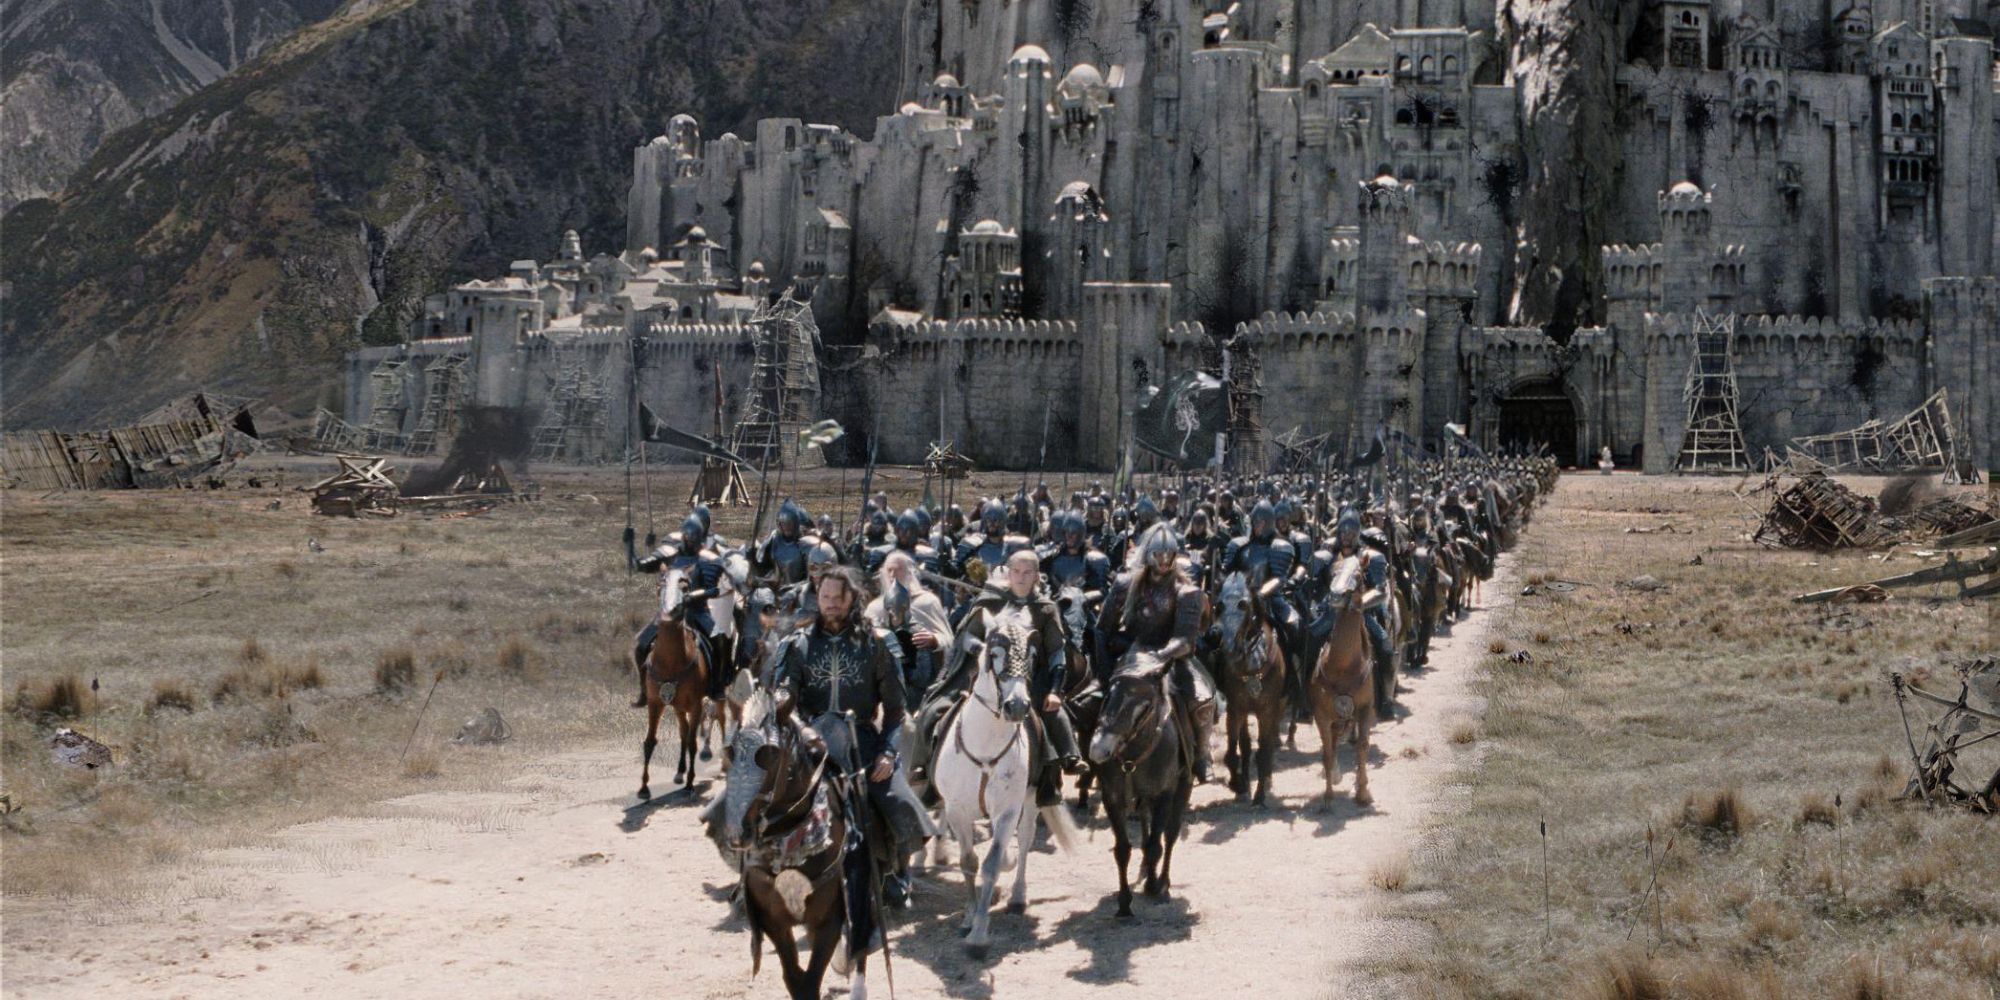 Aragorn (Viggo Mortensen) leading the army in The Lord of the Rings: The Return of the King 